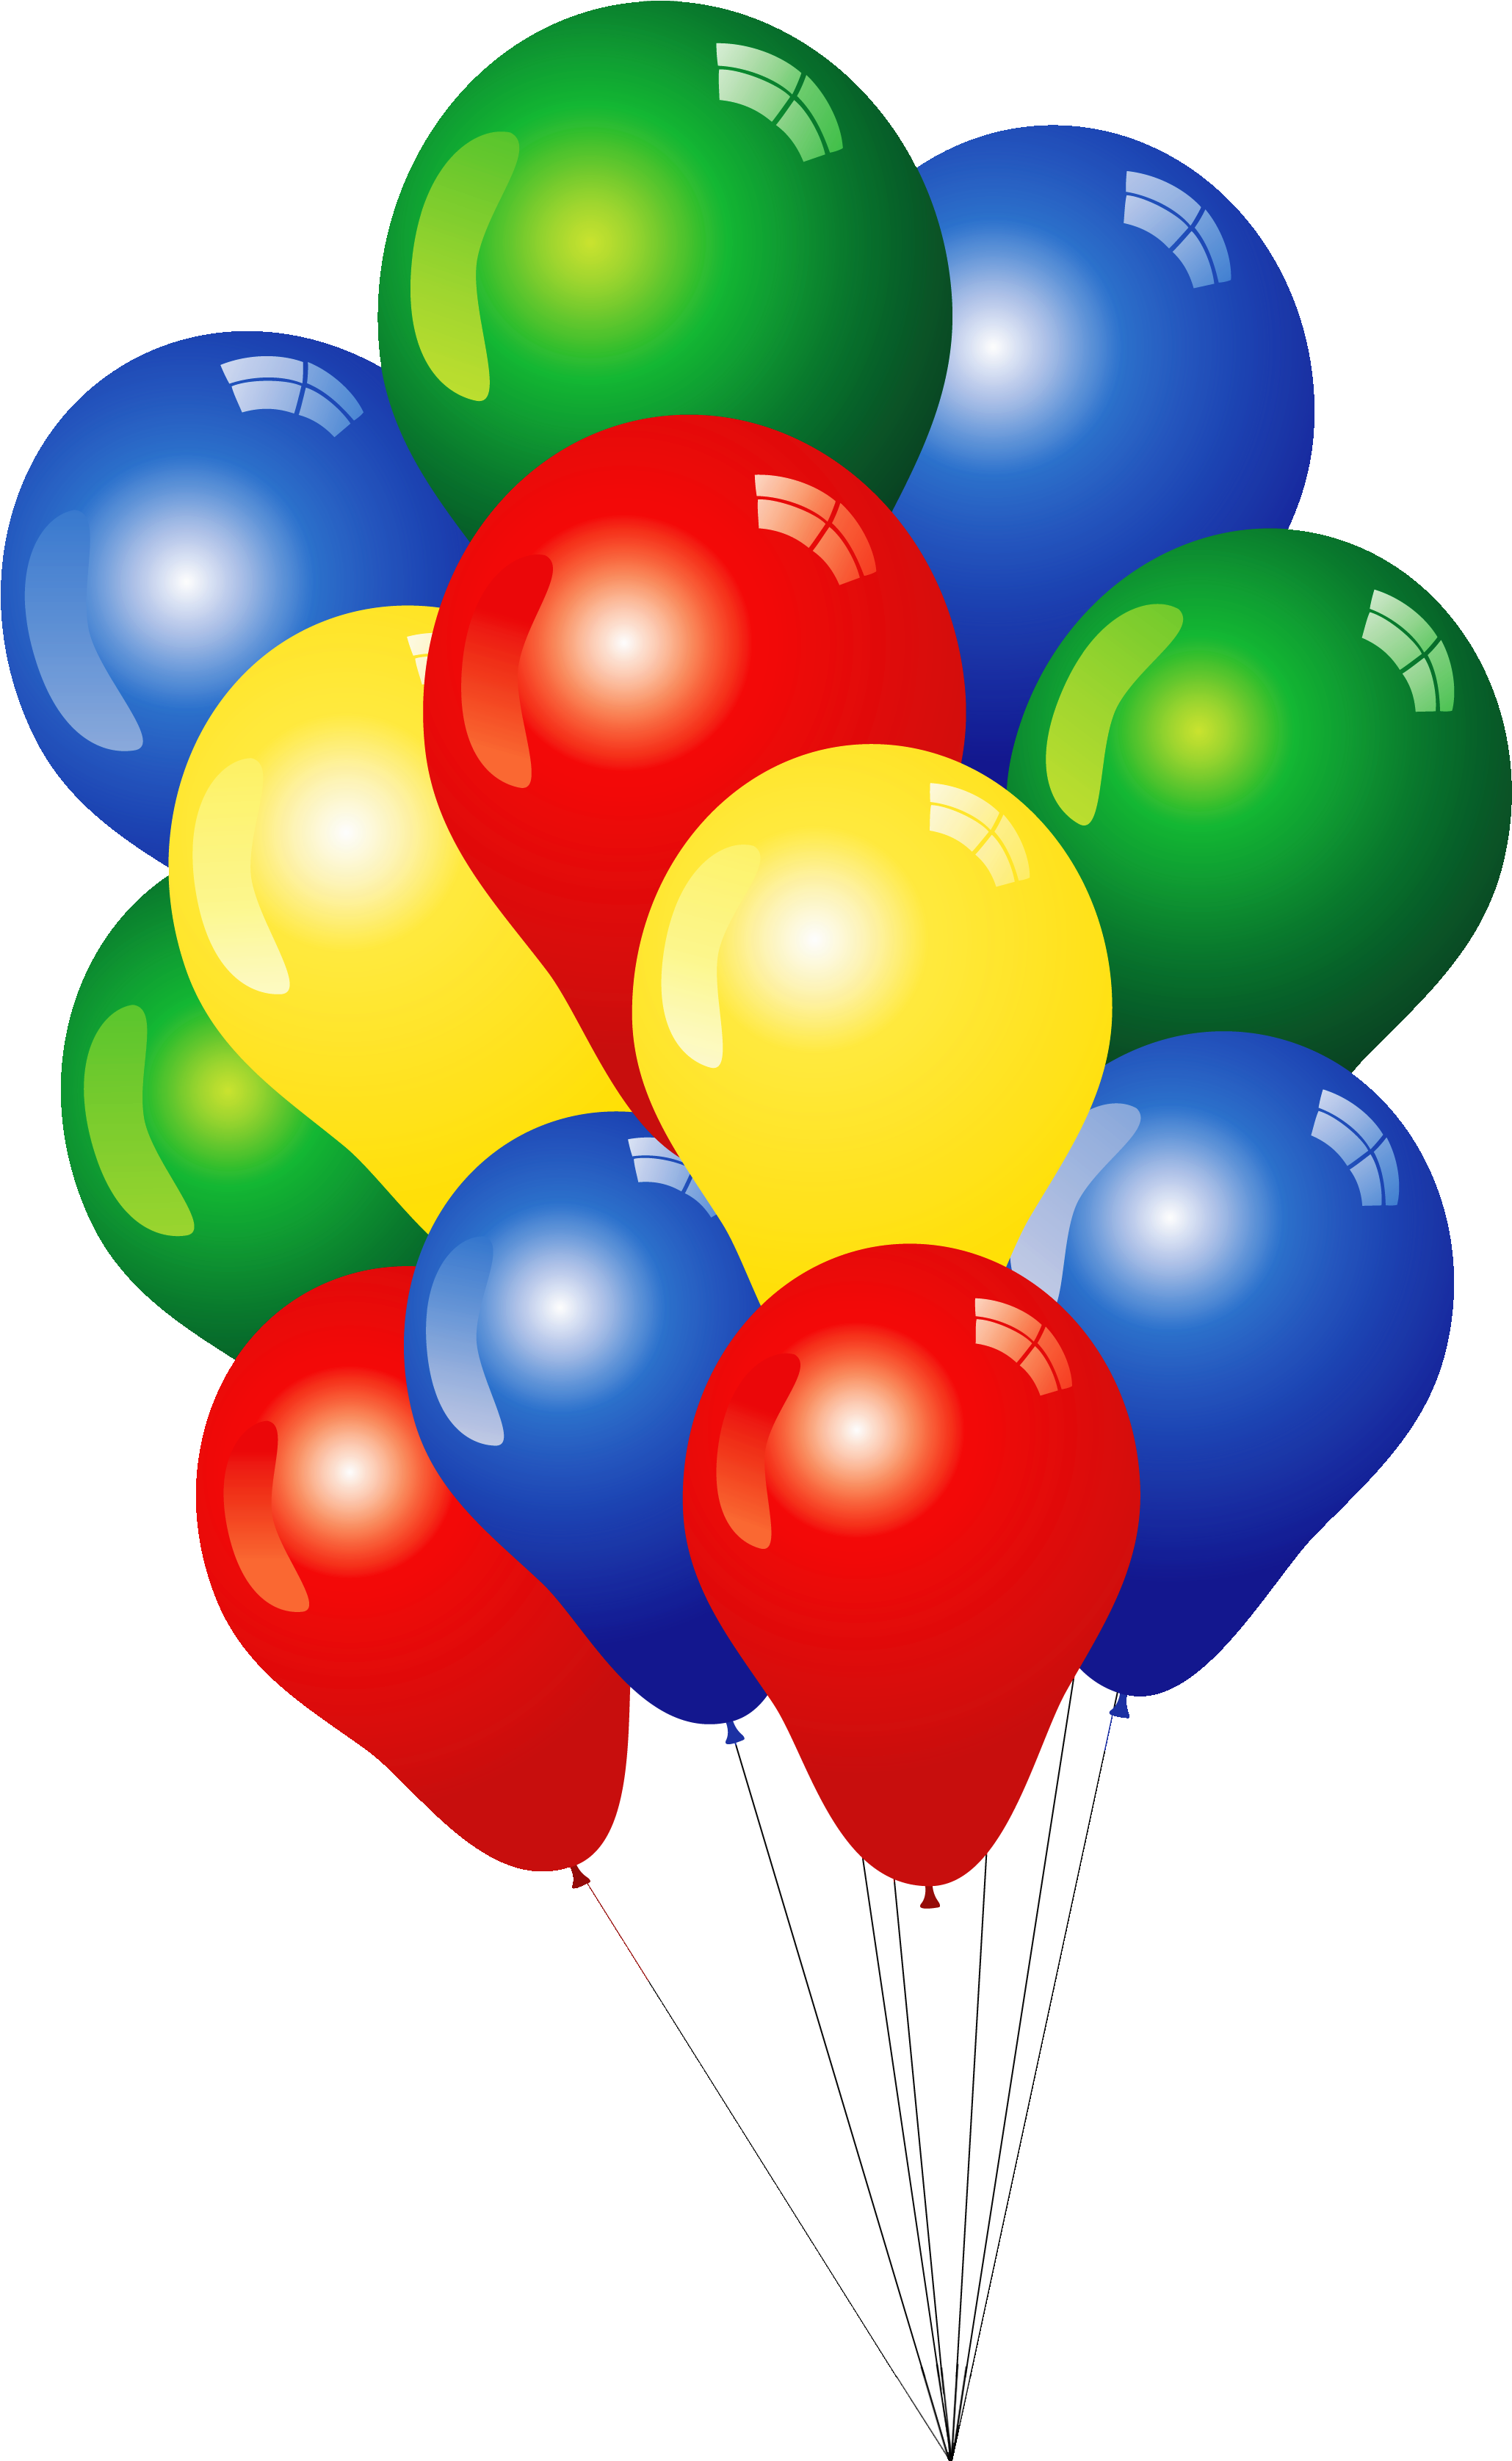 Colorful Birthday Balloons Cluster PNG image